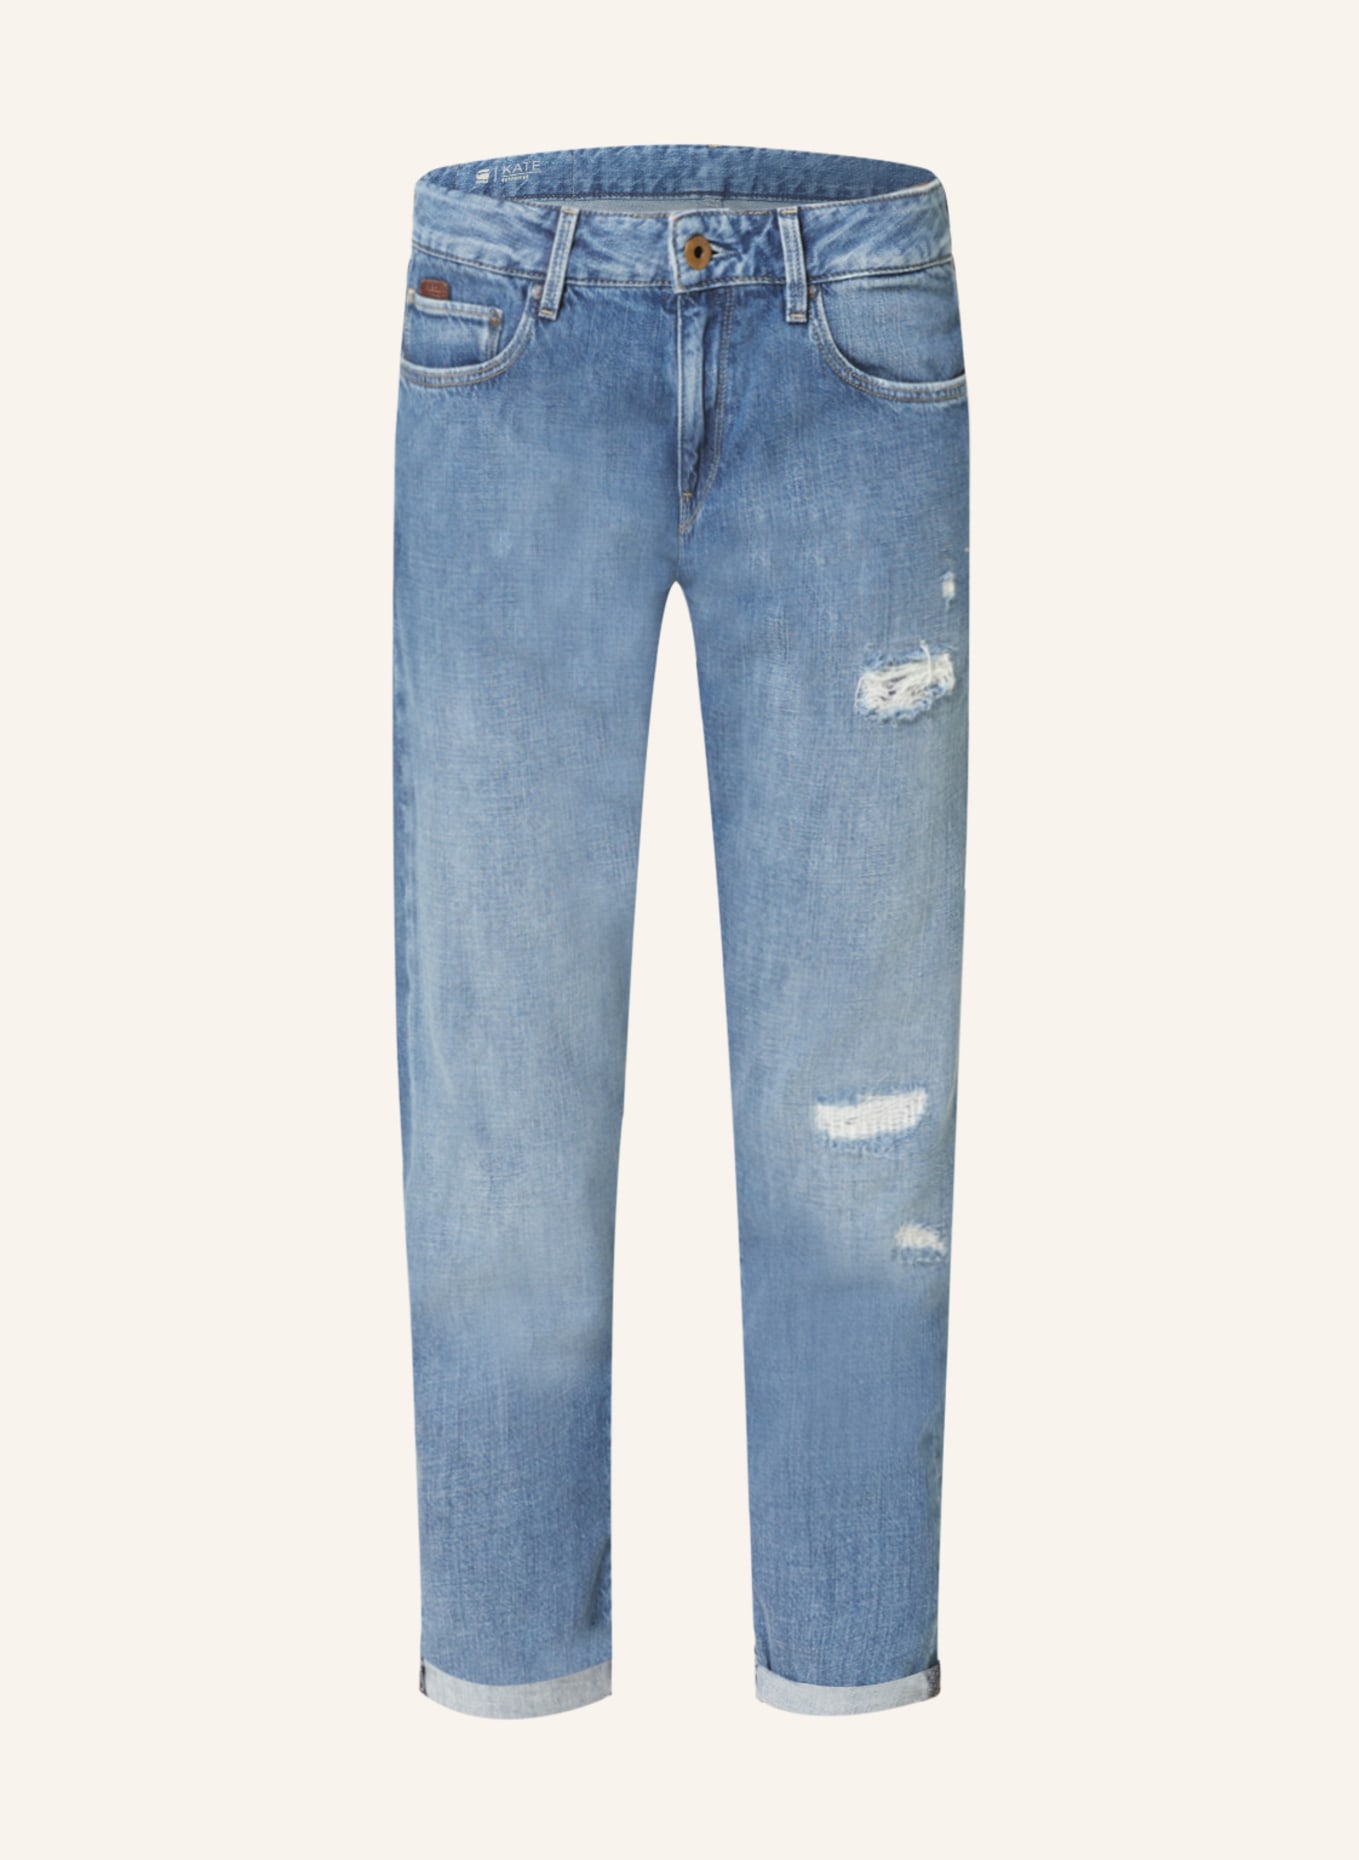 G-Star RAW Destroyed Jeans KATE, Farbe: D894 faded ripped waterfront (Bild 1)